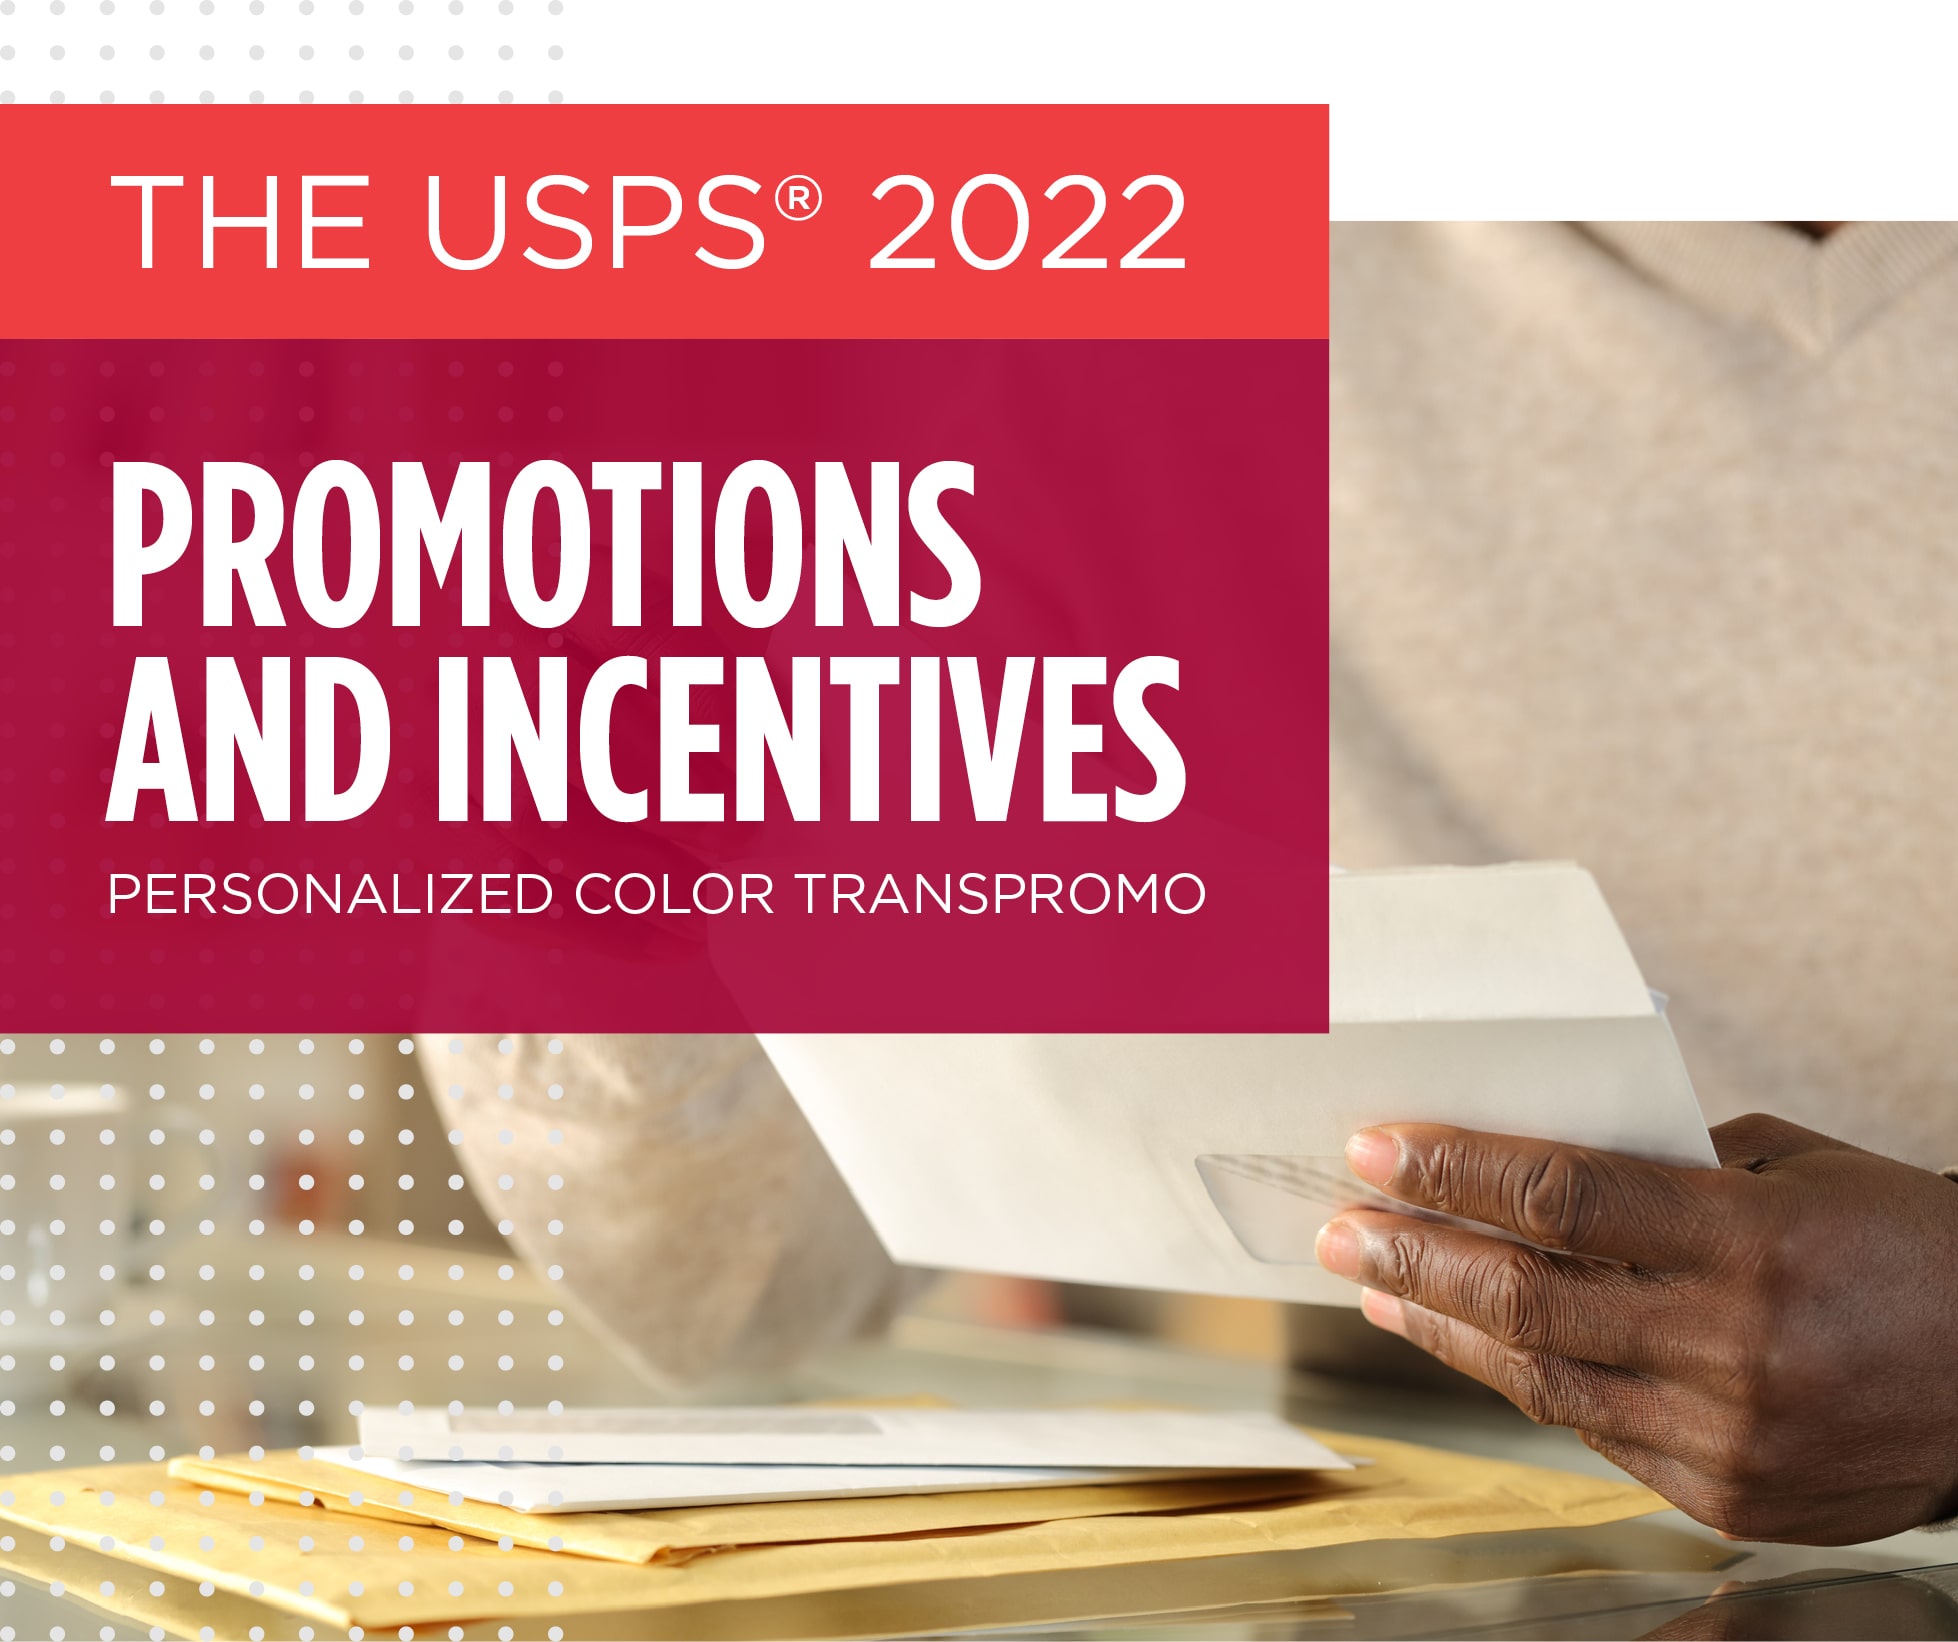 USPS 2022 Personalized Color Transpromo Whitepaper